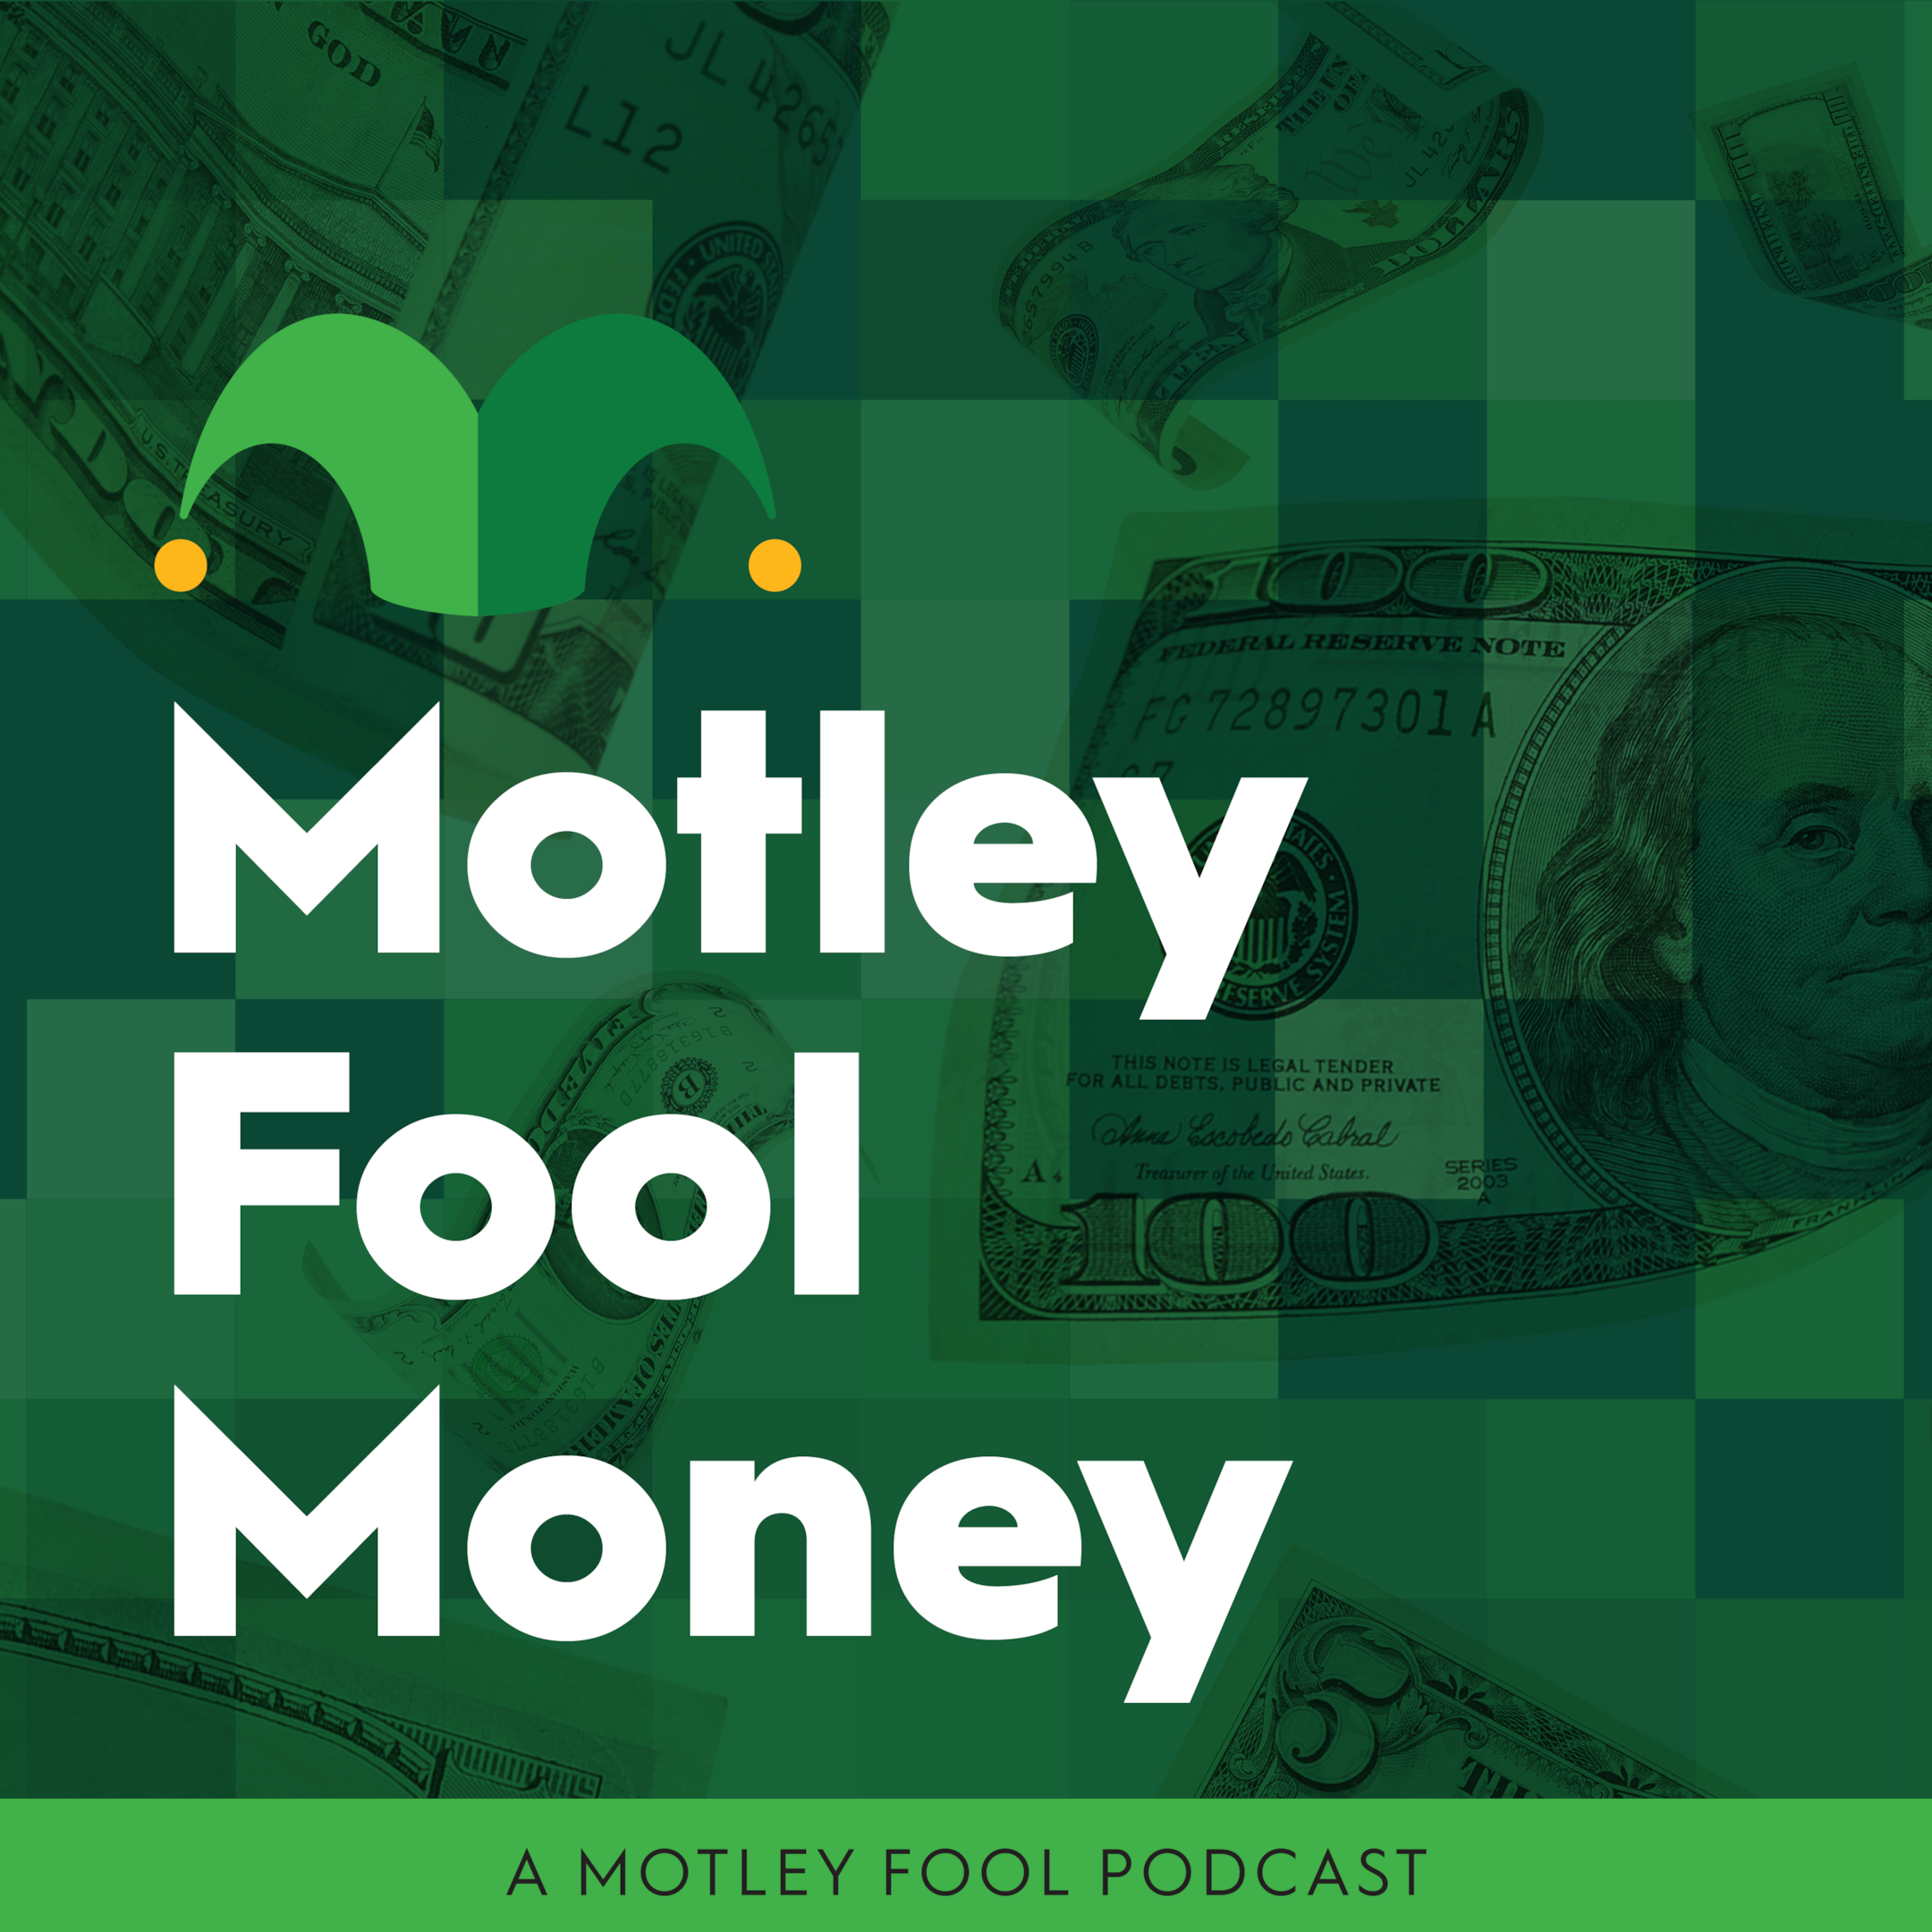 Motley Fool Money Investment Podcast